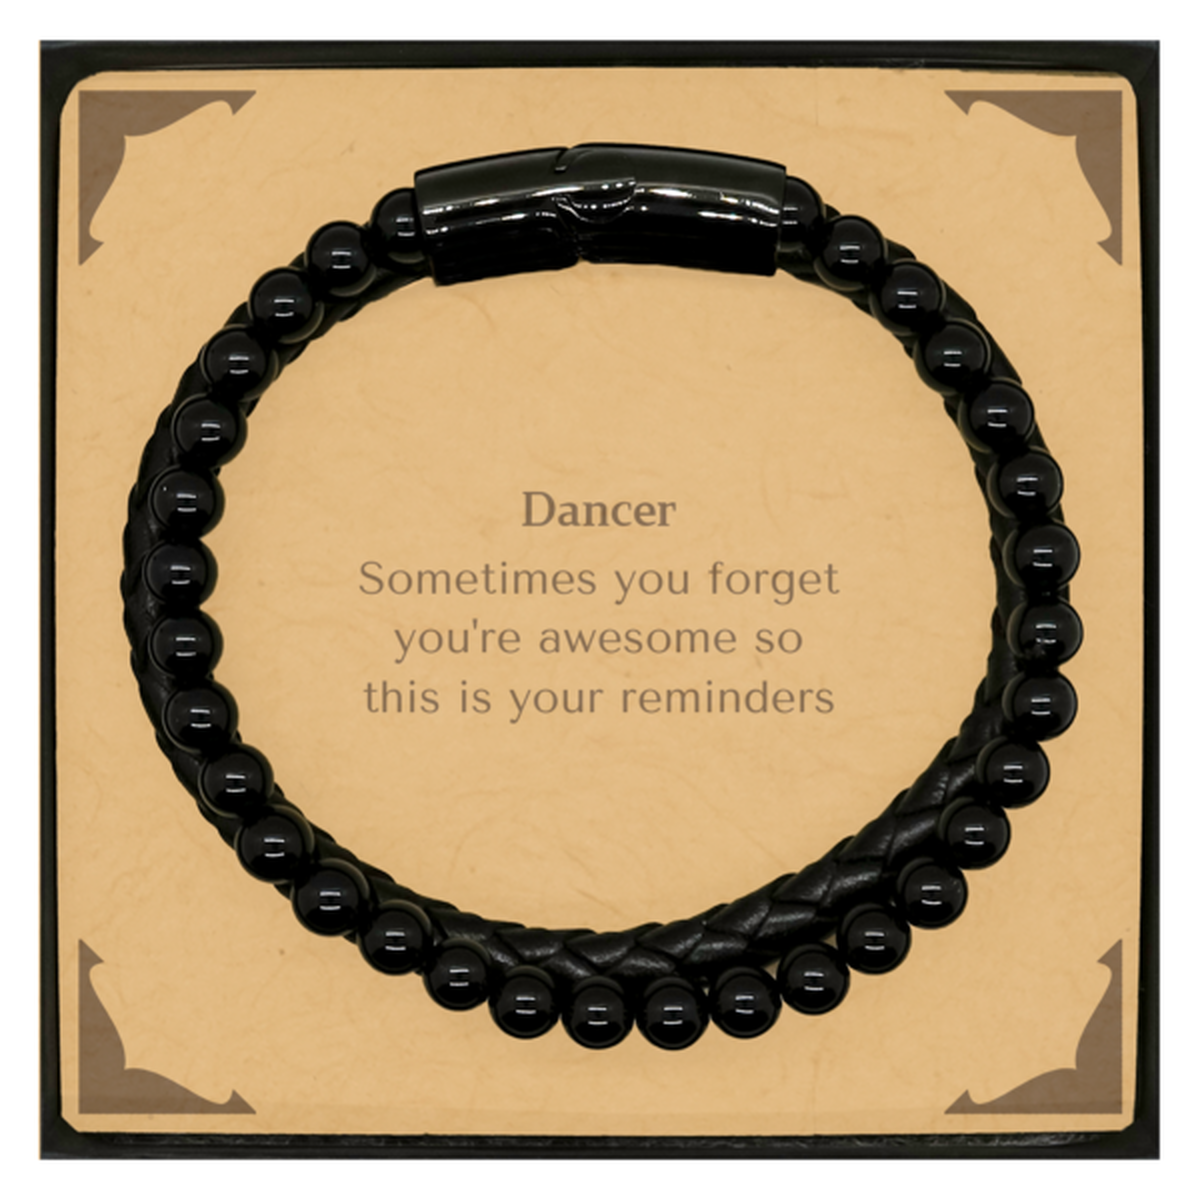 Sentimental Dancer Stone Leather Bracelets, Dancer Sometimes you forget you're awesome so this is your reminders, Graduation Christmas Birthday Gifts for Dancer, Men, Women, Coworkers